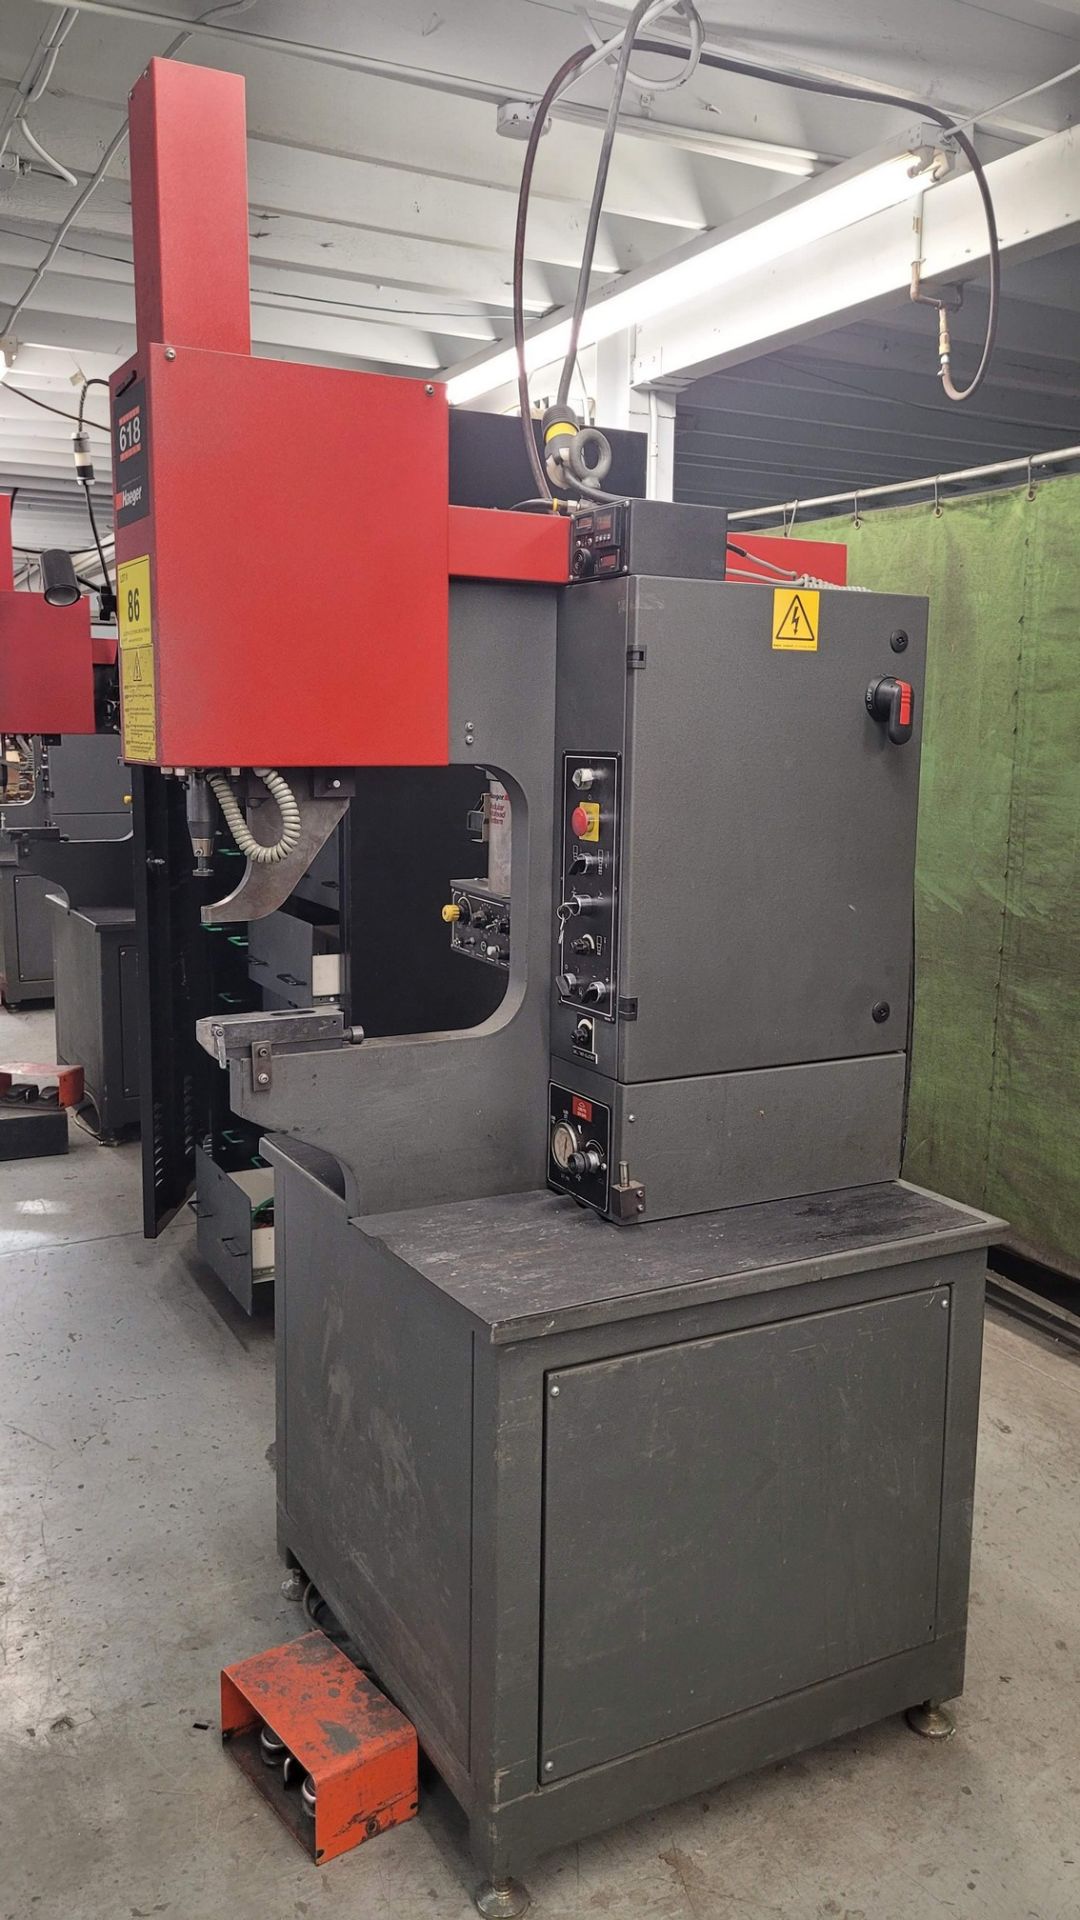 HAEGER 618-1H HYDRAULIC INSERTION PRESS, S/N - 06H01026 W/ HAEGER MODULAR AUTOFEED SYSTEM (RIGGING - Image 2 of 11